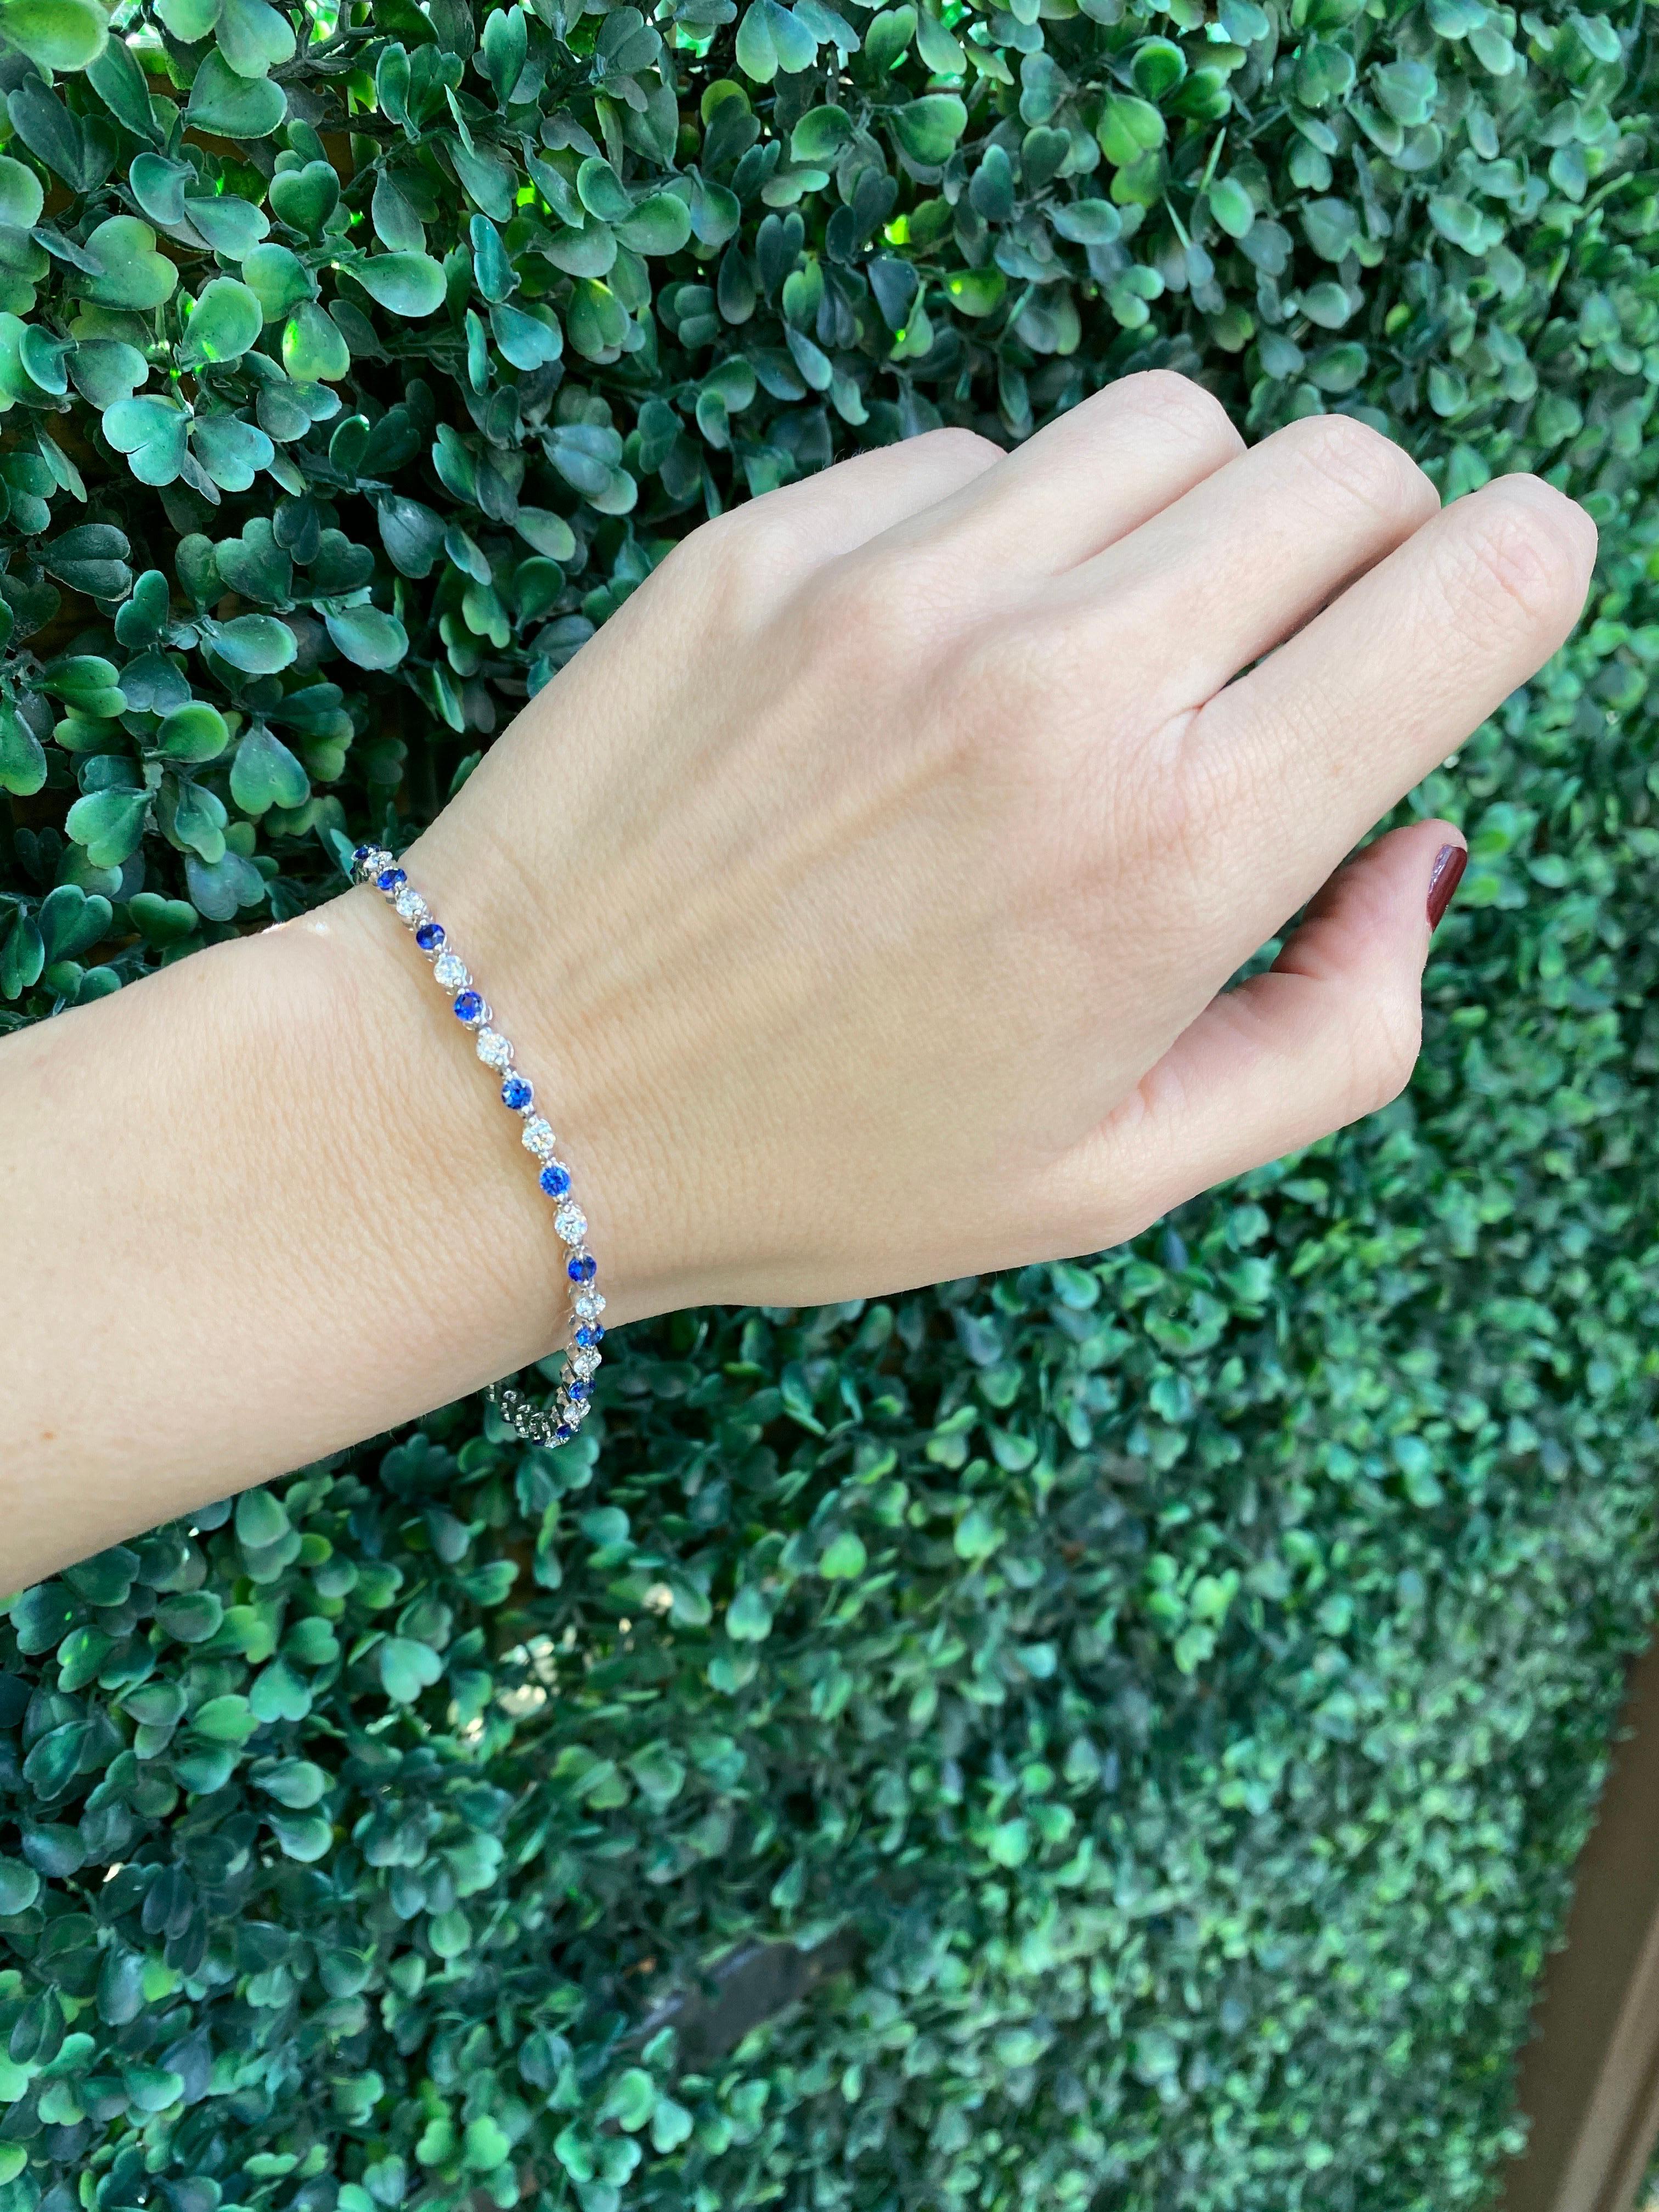 This beautiful bracelet features 2.45 carat total weight in round natural blue sapphires alternating with 2.01 carat total weight in round natural diamonds set in 14 karat white gold. It has a box clasp with safety closure. Wear alone of layer with